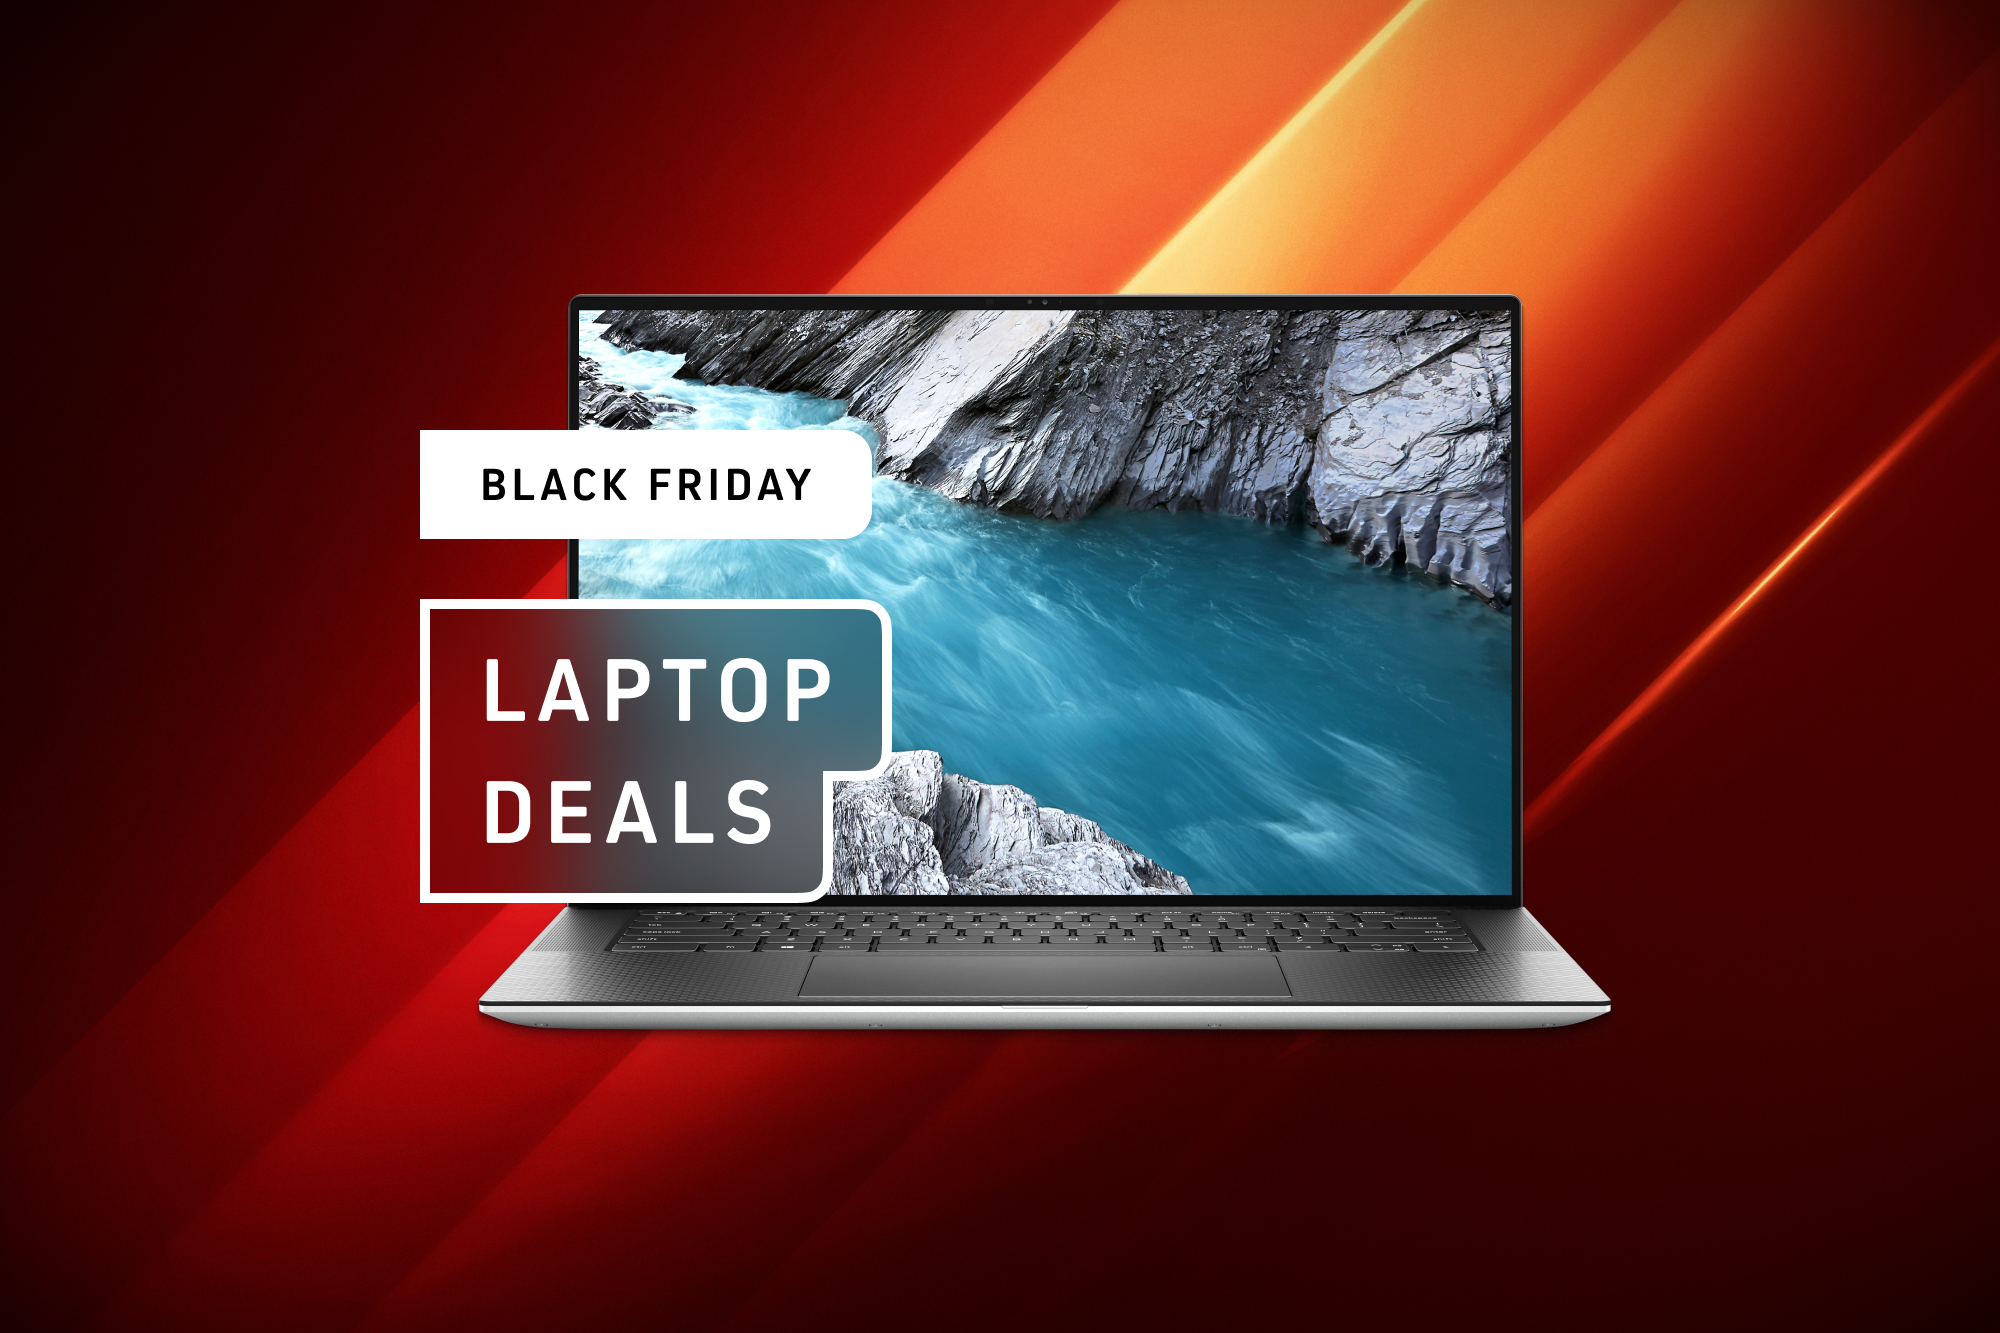 Microsoft Store - Deals on Laptops, Windows Computers & Other Discounts